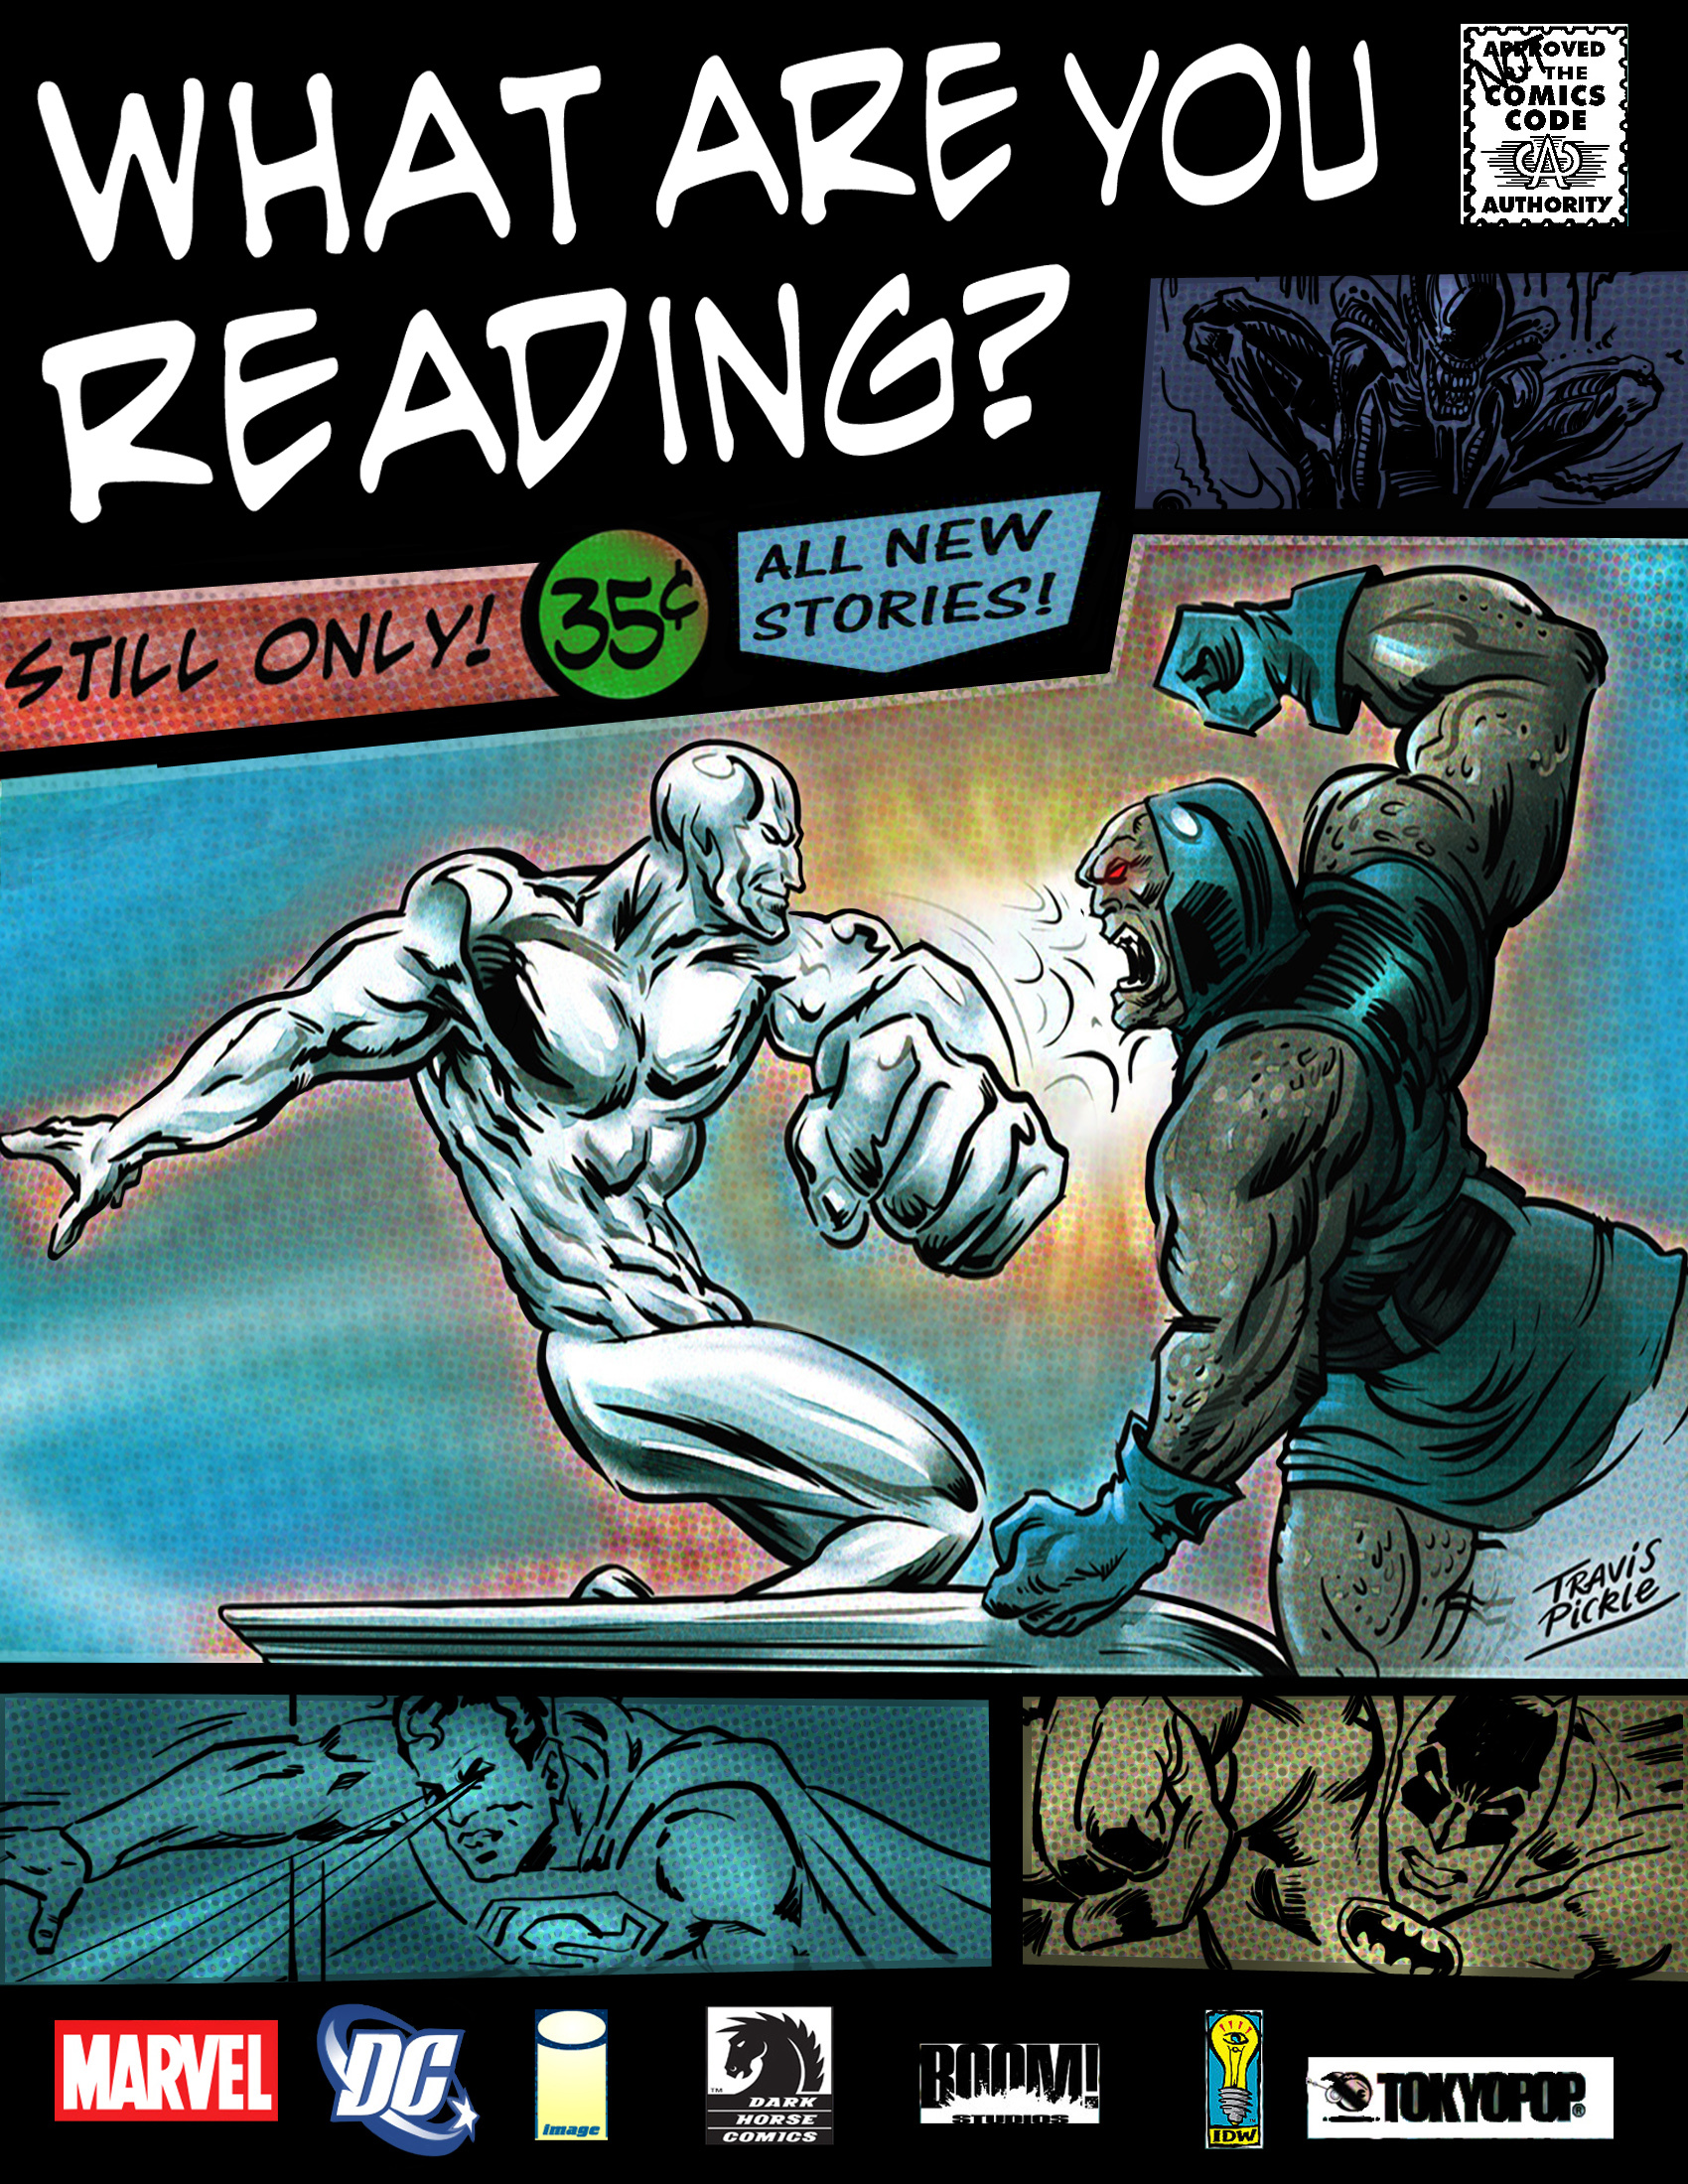 What Are You Reading? Volume 8 Issue 23